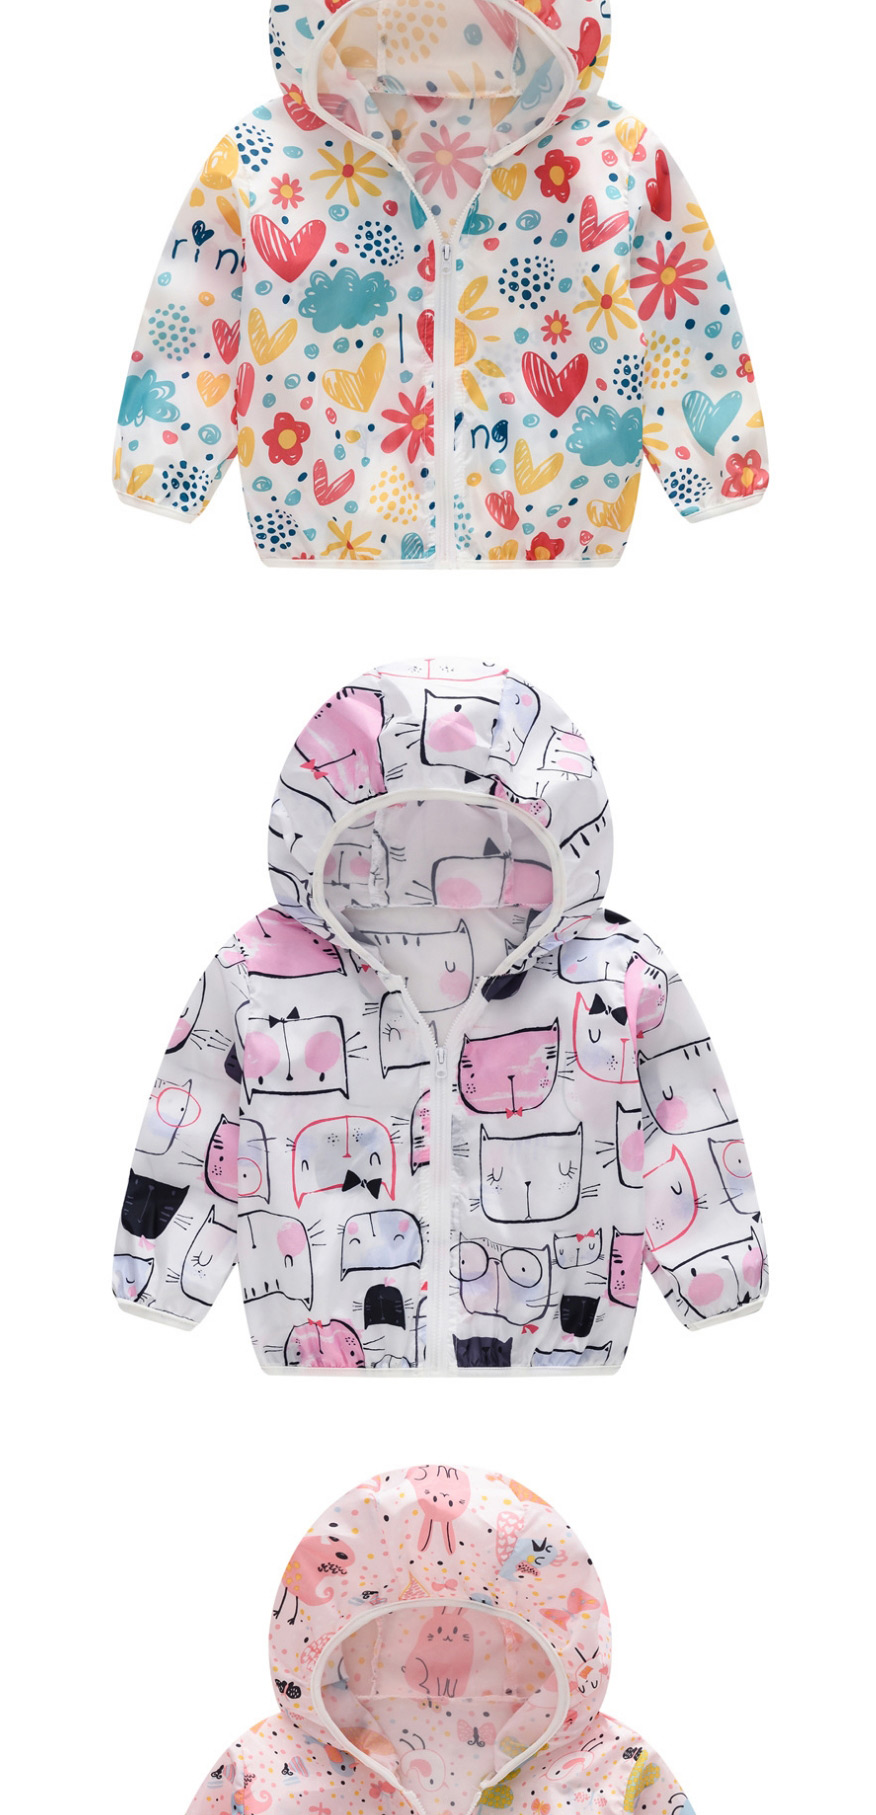 Fashion Butterfly Hooded Outdoor Sun Protection Clothing,Kids Clothing